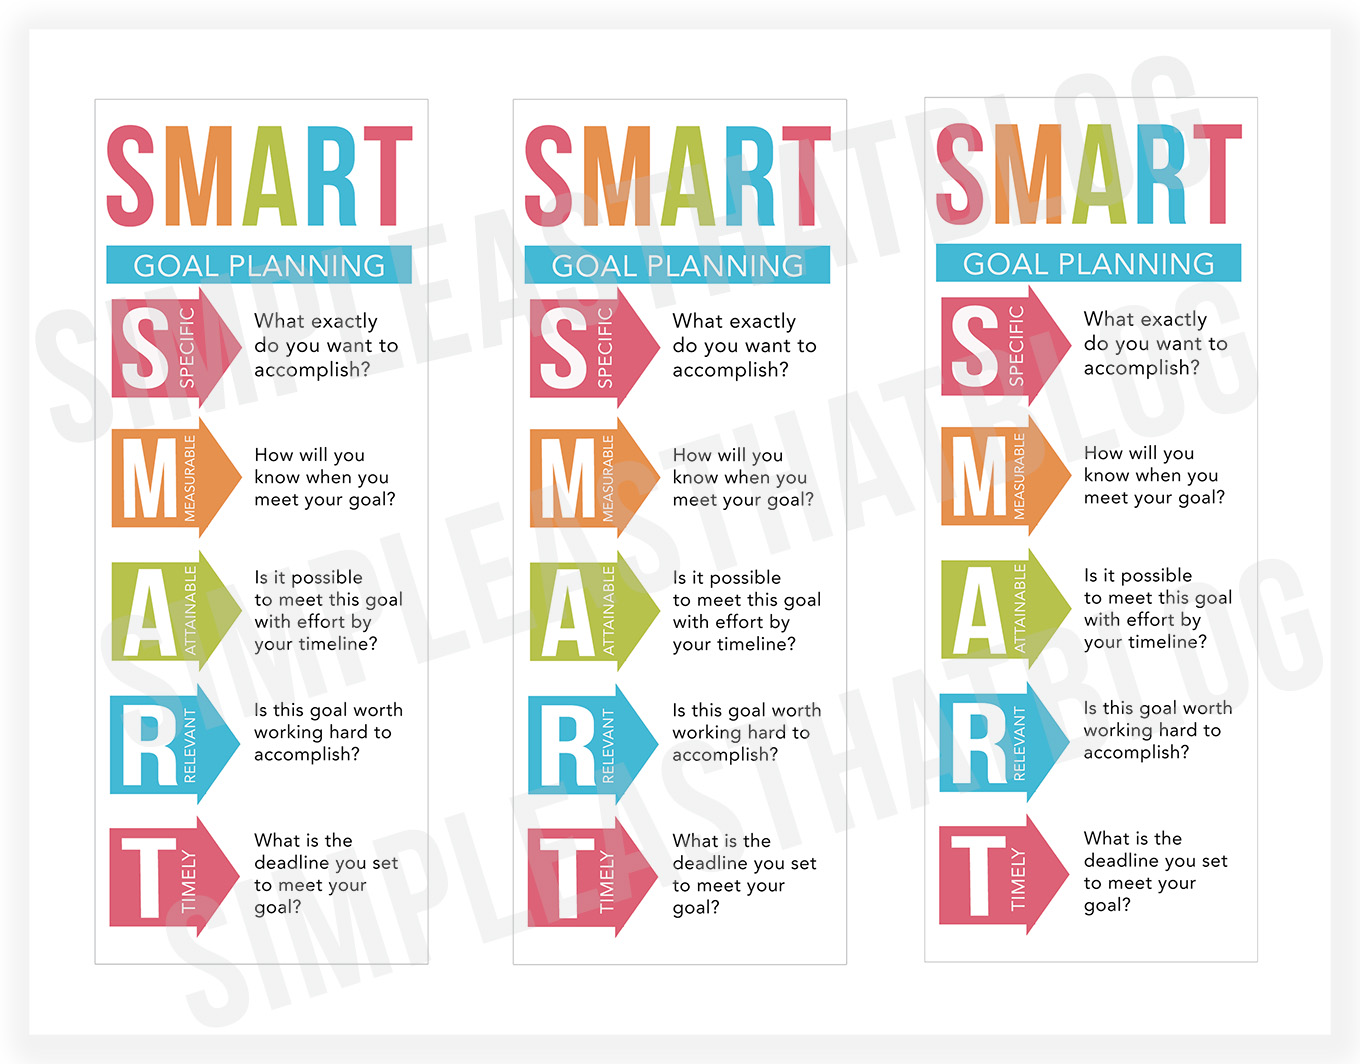  The image shows three columns with the title 'SMART Goal Planning'. Each column has the letters 'S', 'M', 'A', 'R', and 'T' with a question next to each letter. The 'S' column asks, 'What exactly do you want to accomplish?', the 'M' column asks, 'How will you know when you meet your goal?', the 'A' column asks, 'Is it possible to meet this goal with effort by your timeline?', the 'R' column asks, 'Is this goal worth working hard to accomplish?', and the 'T' column asks, 'What is the deadline you set to meet your goal?'.